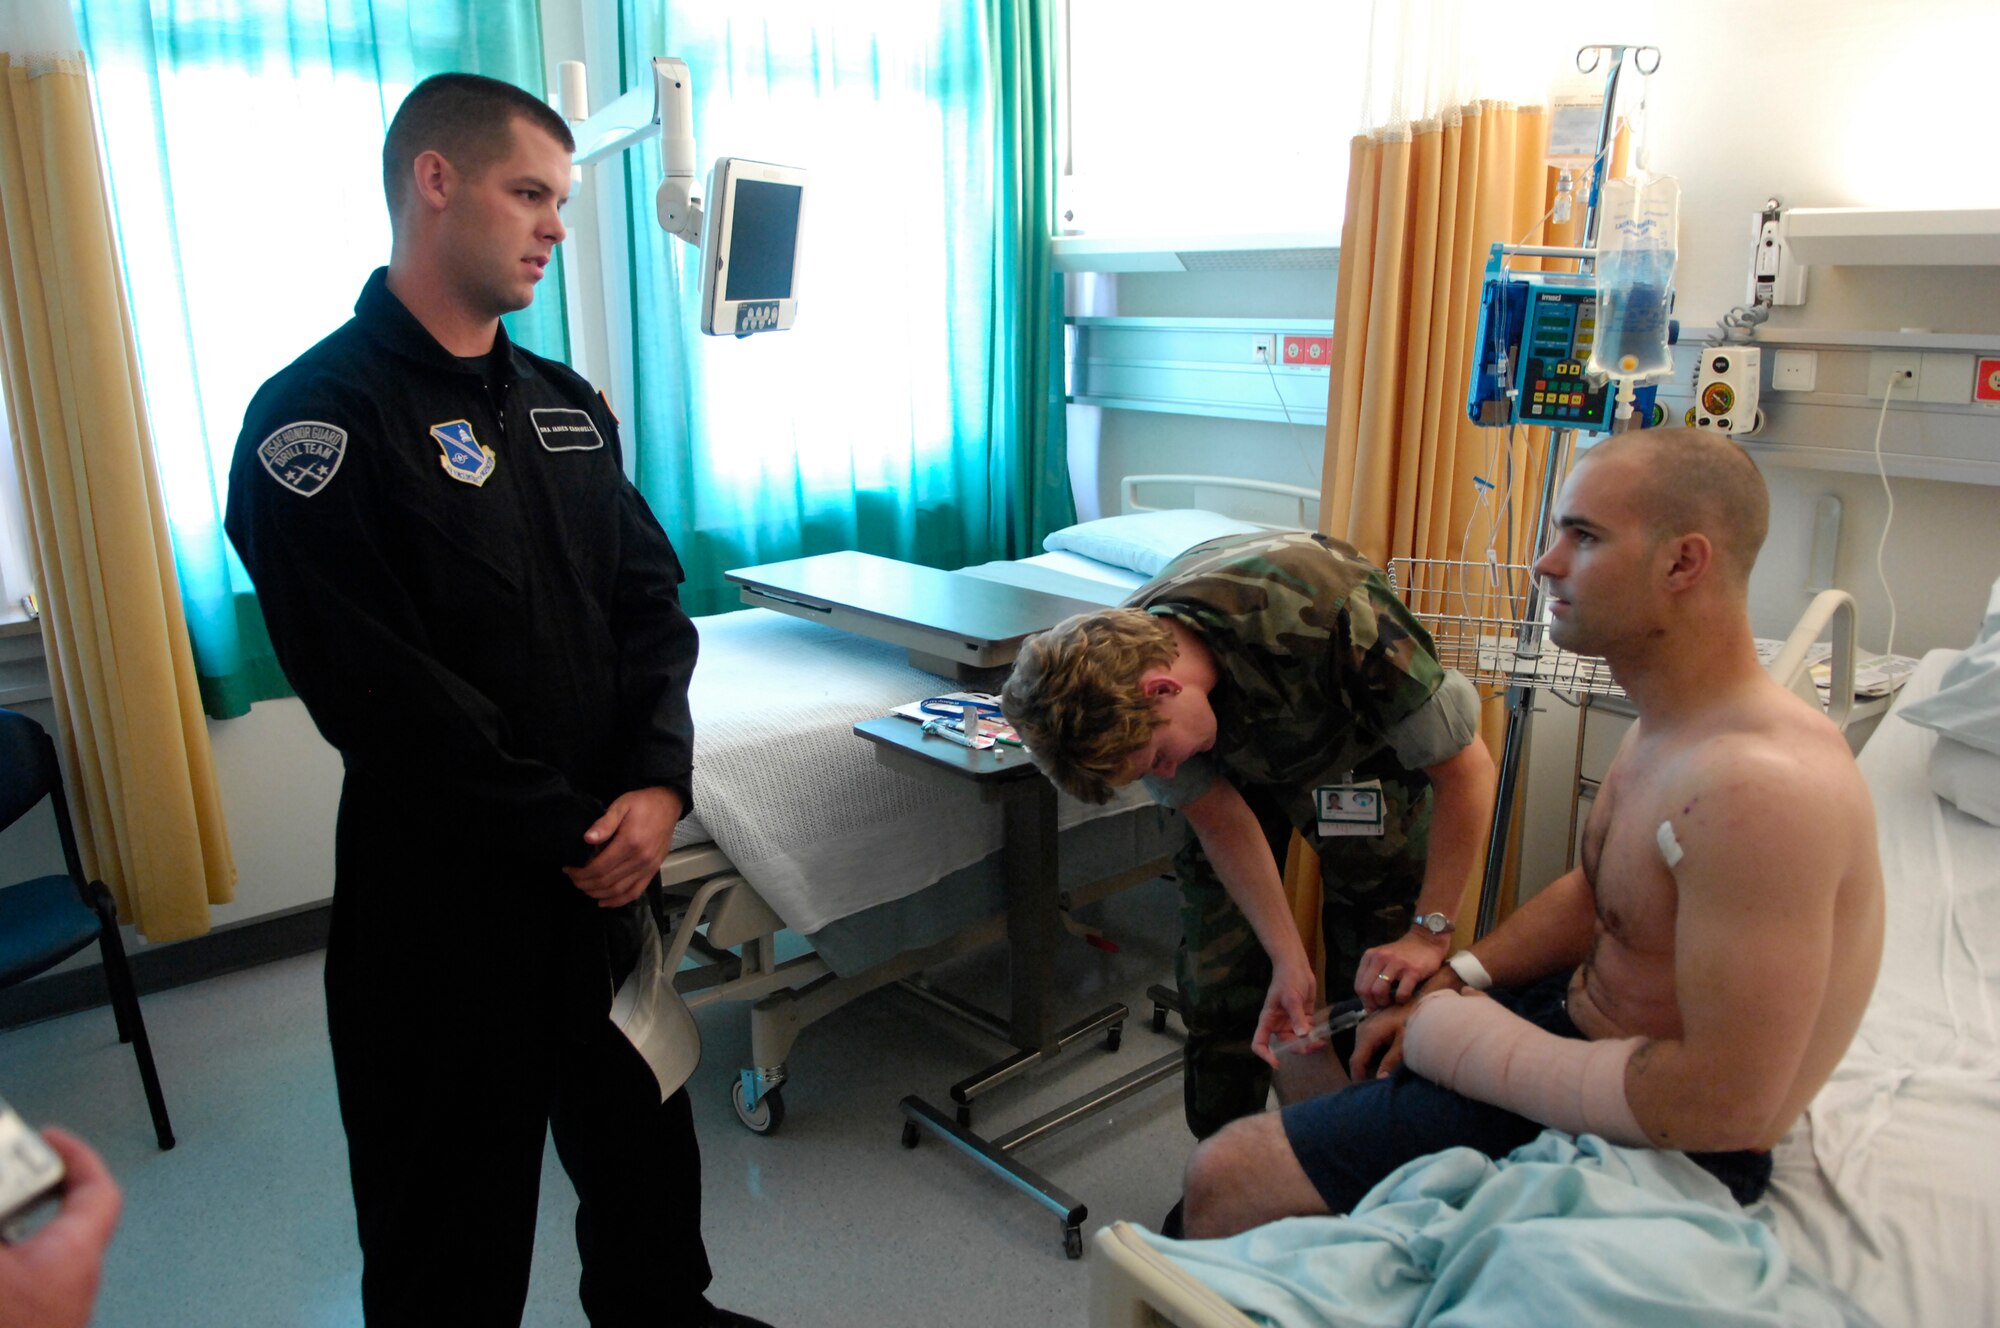 Senior Airman James Cashwell, U.S. Air Force Honor Guard Drill Team, talks with a hometown friend, Army Spc. Matthew Goodwin, after a suprise & chance meeting at Landstuhl Regional Medical Center on 1 Aug. 2007. The Drill Team performed for, and visited, wounded warriors and the medical center staff on 1 Aug. 2007, during their recent Europe tour. (U.S. Air Force photo by Senior Airman Daniel DeCook)(Released)